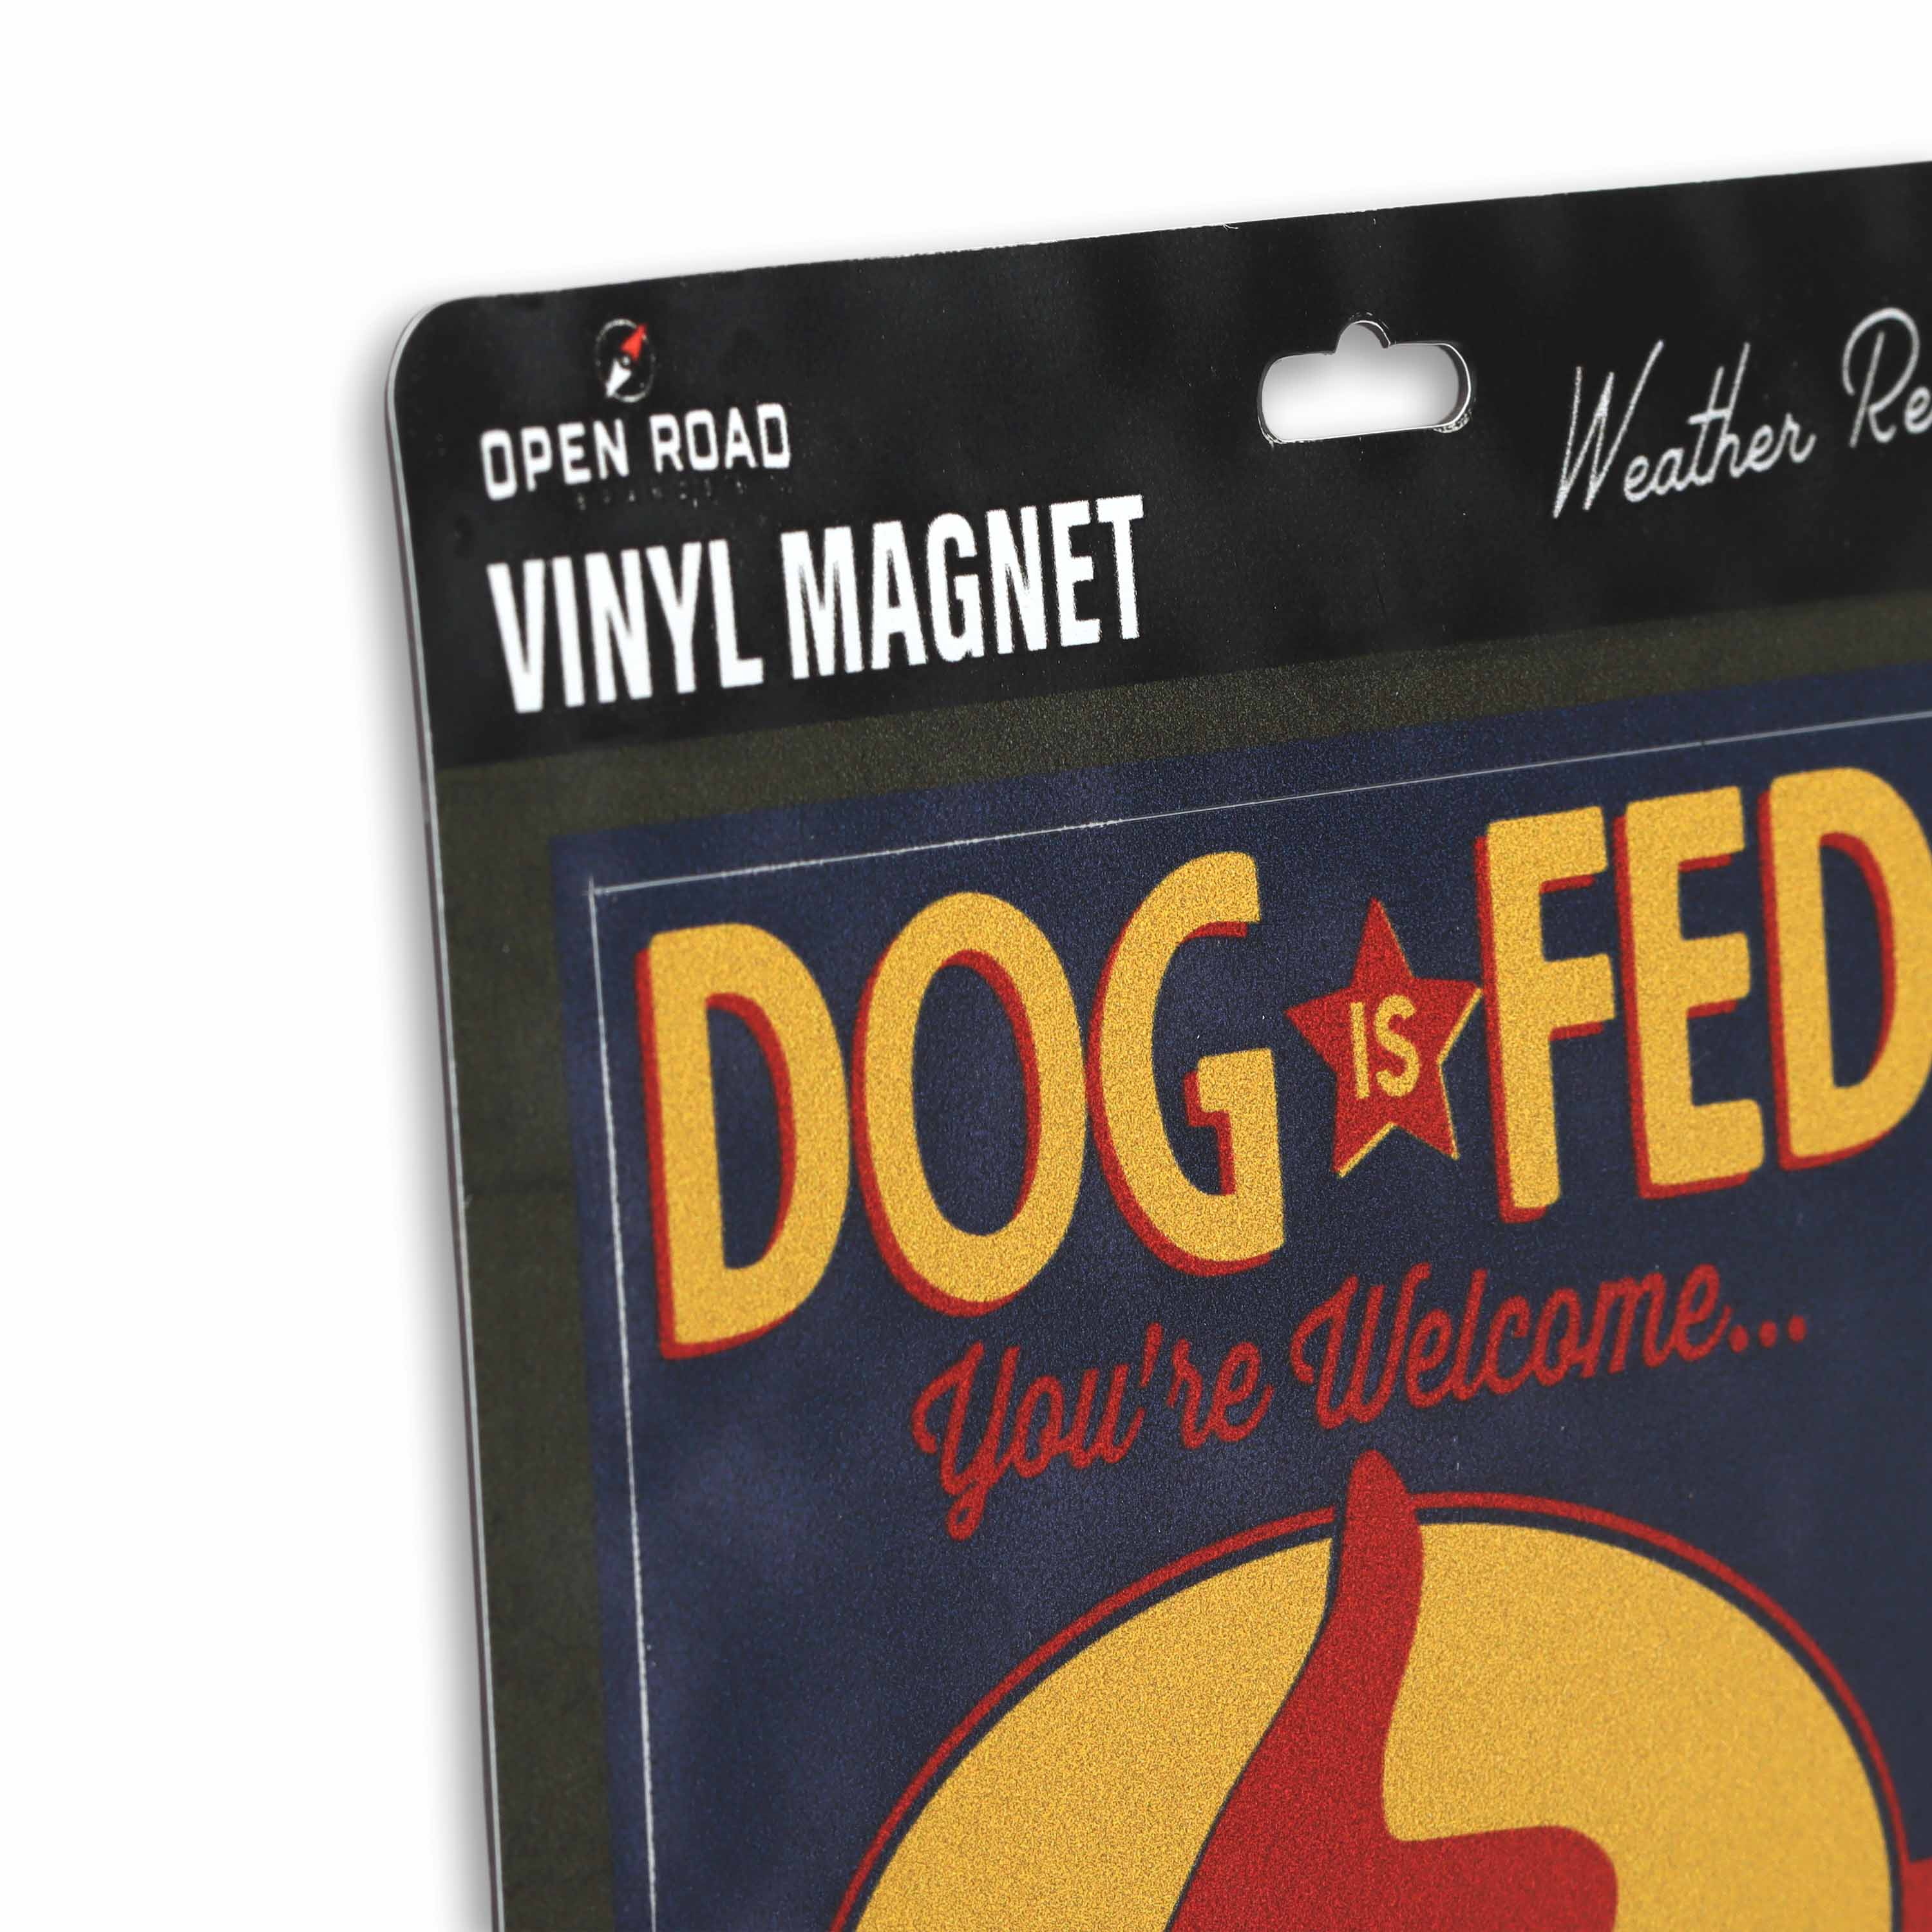 Open Road's Feed the Dog Magnet